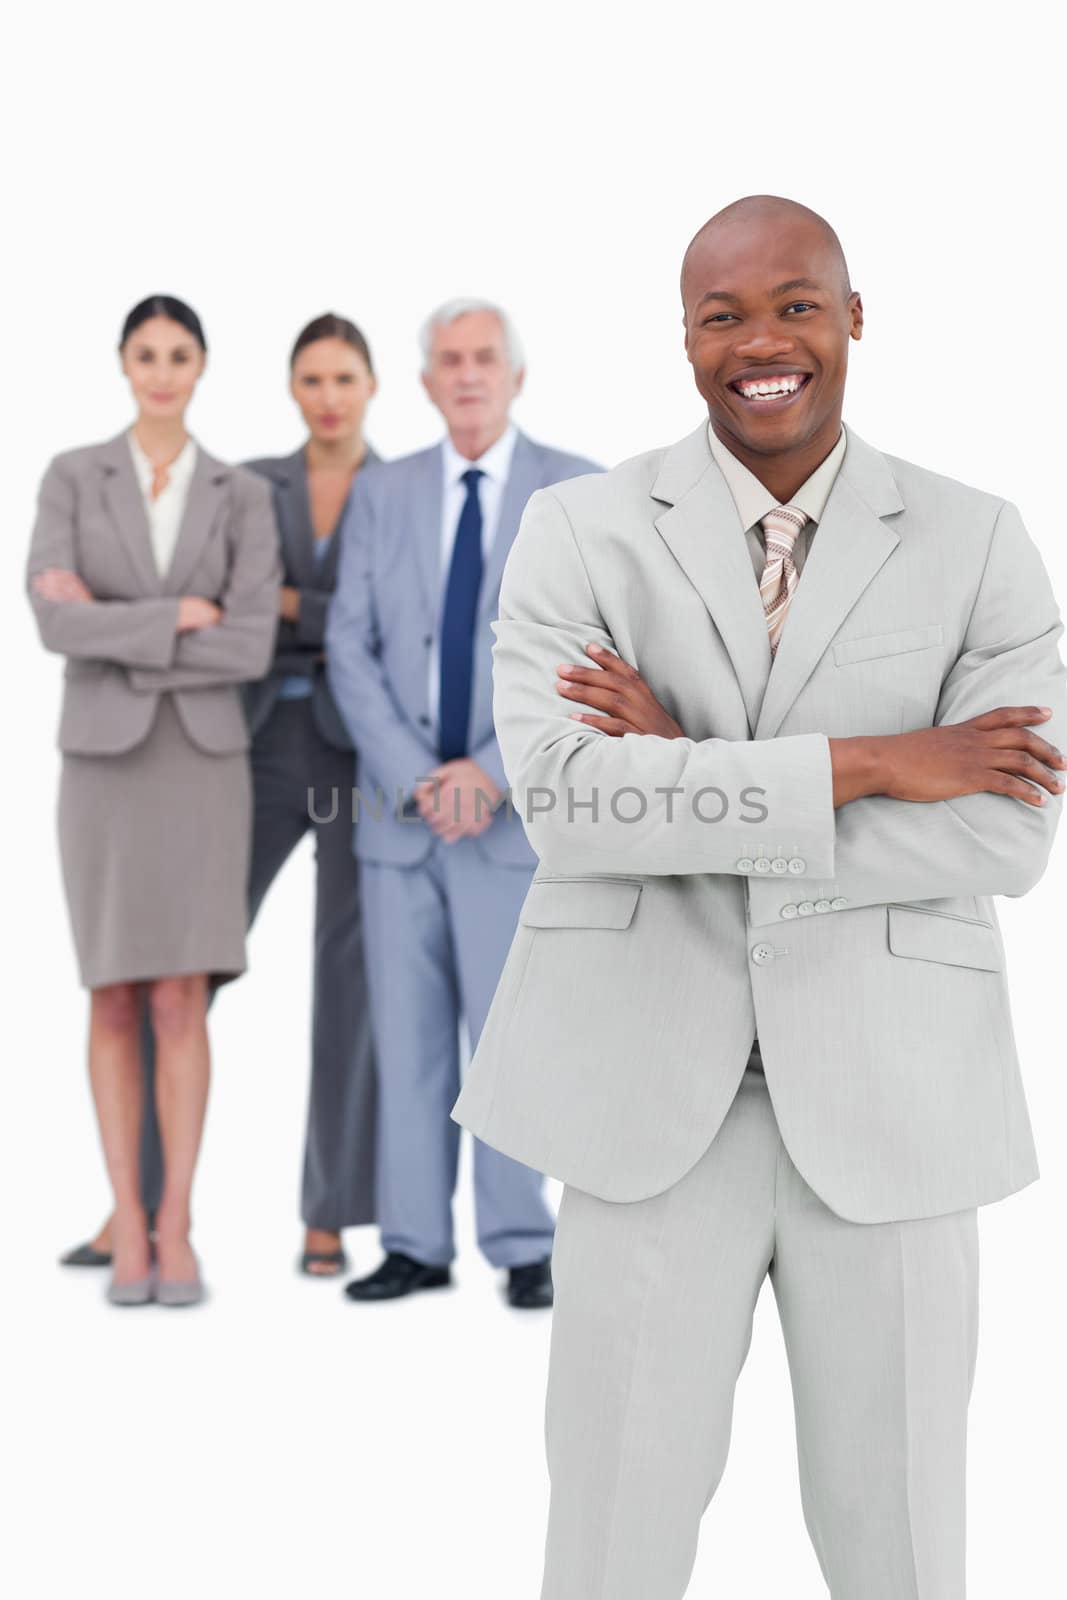 Smiling businessman with arms folded and team behind him against a white background